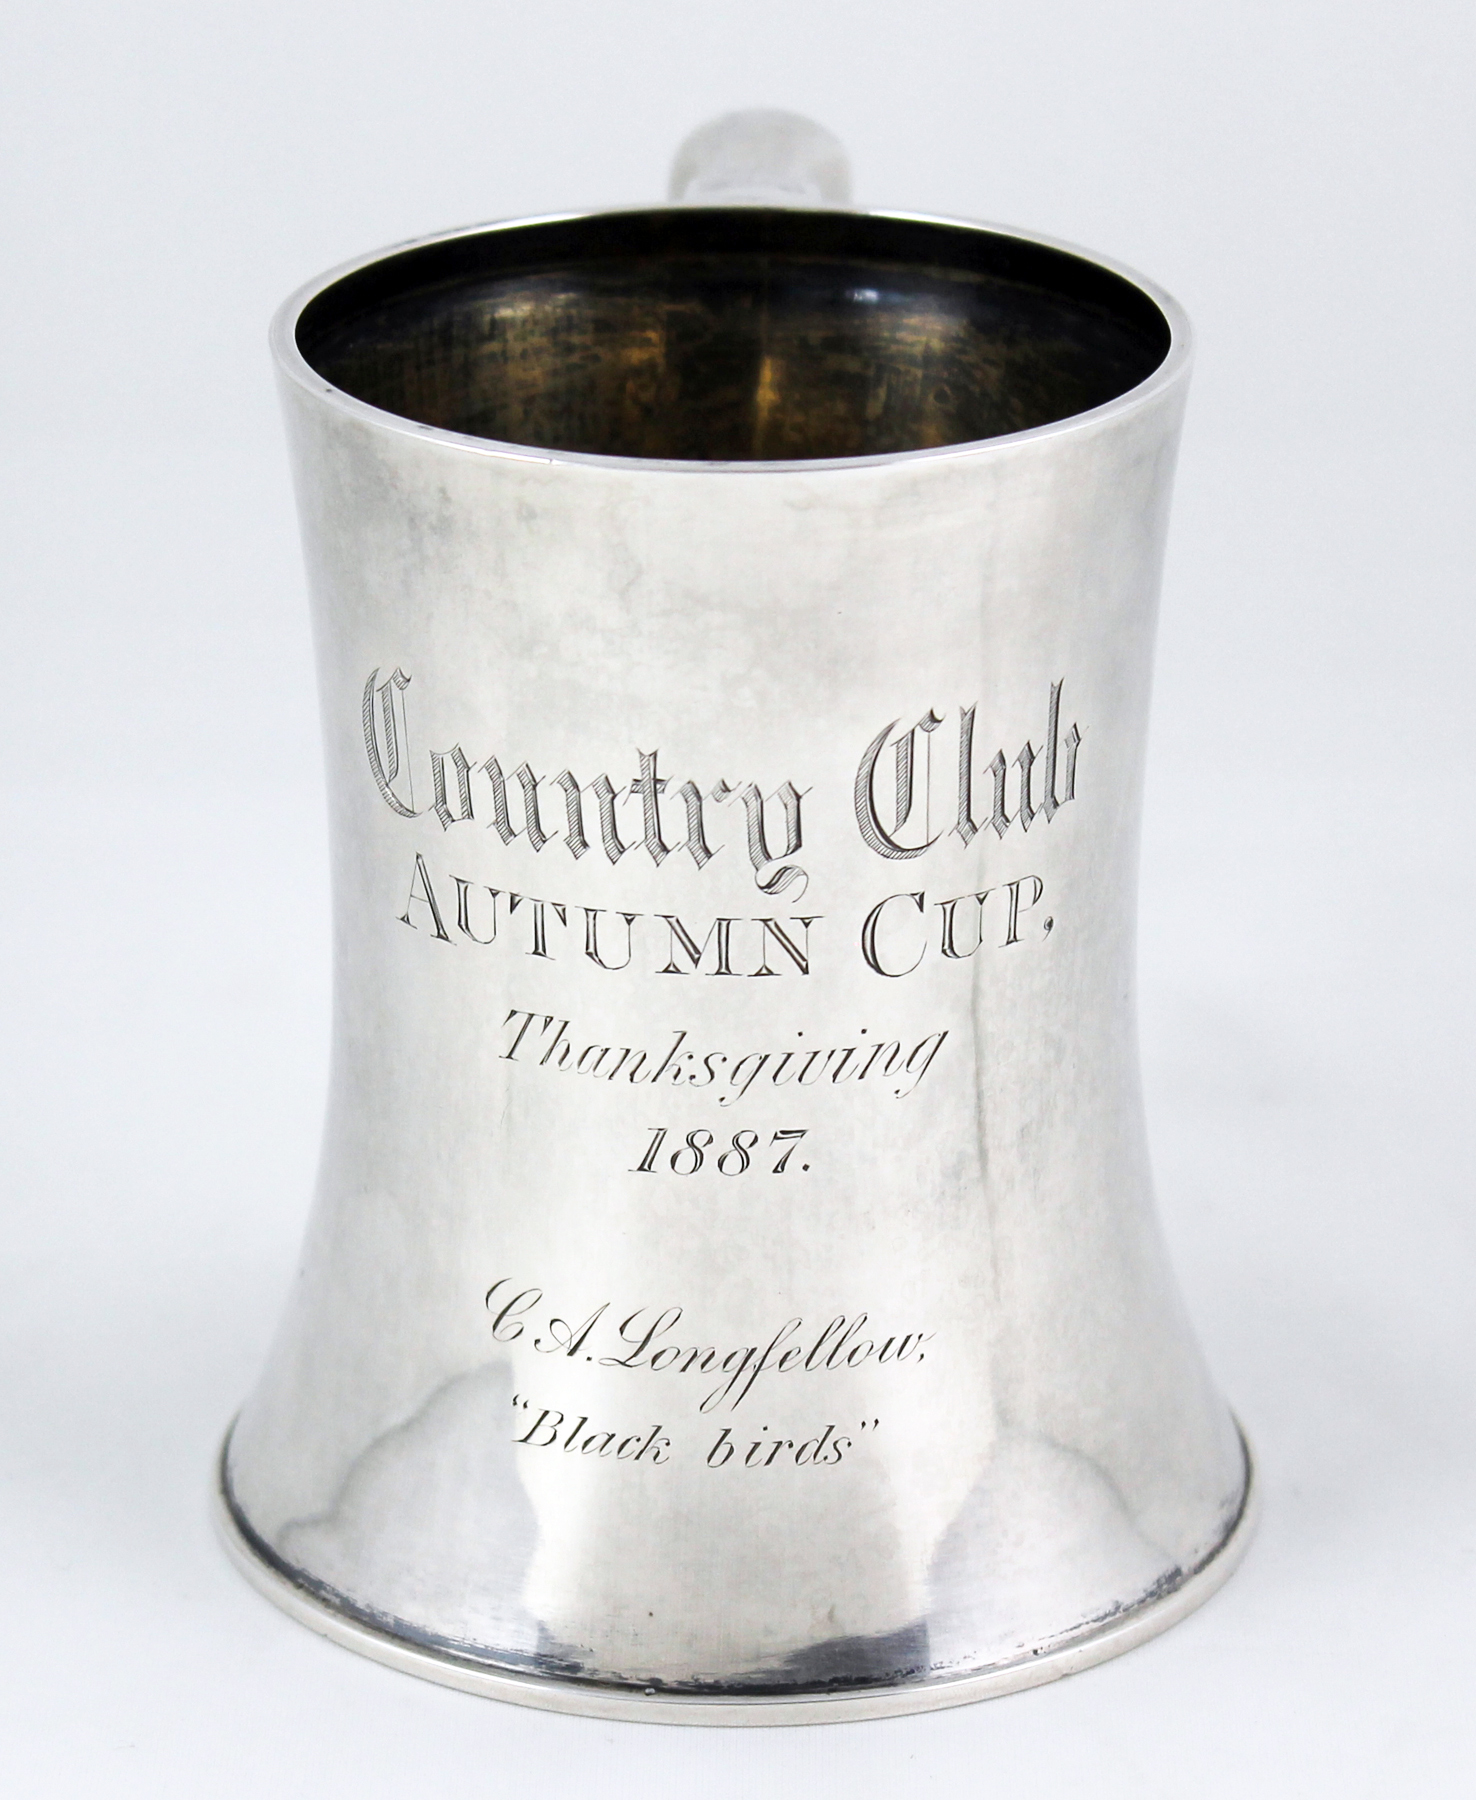 The Country Club Autumn Cup for 1887, won by Charles A. Longfellow.